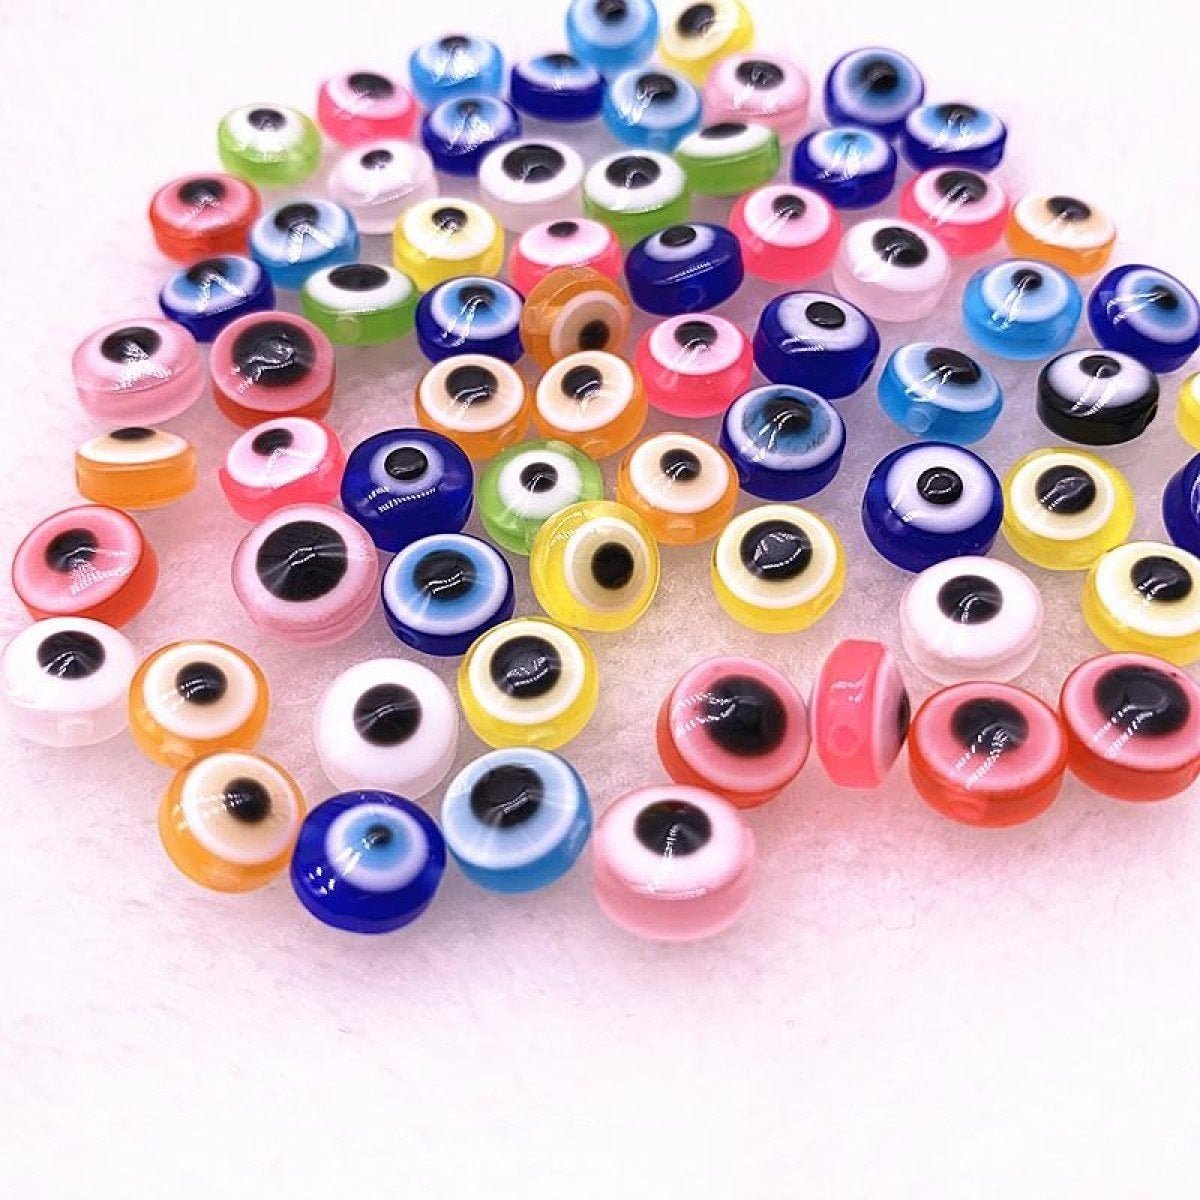 48pcs 8/10mm Oval Resin Spacer Beads Double Sided Eyes for Jewellery Making DIY Bracelet Beads Set B - Green 8mm - Asia Sell